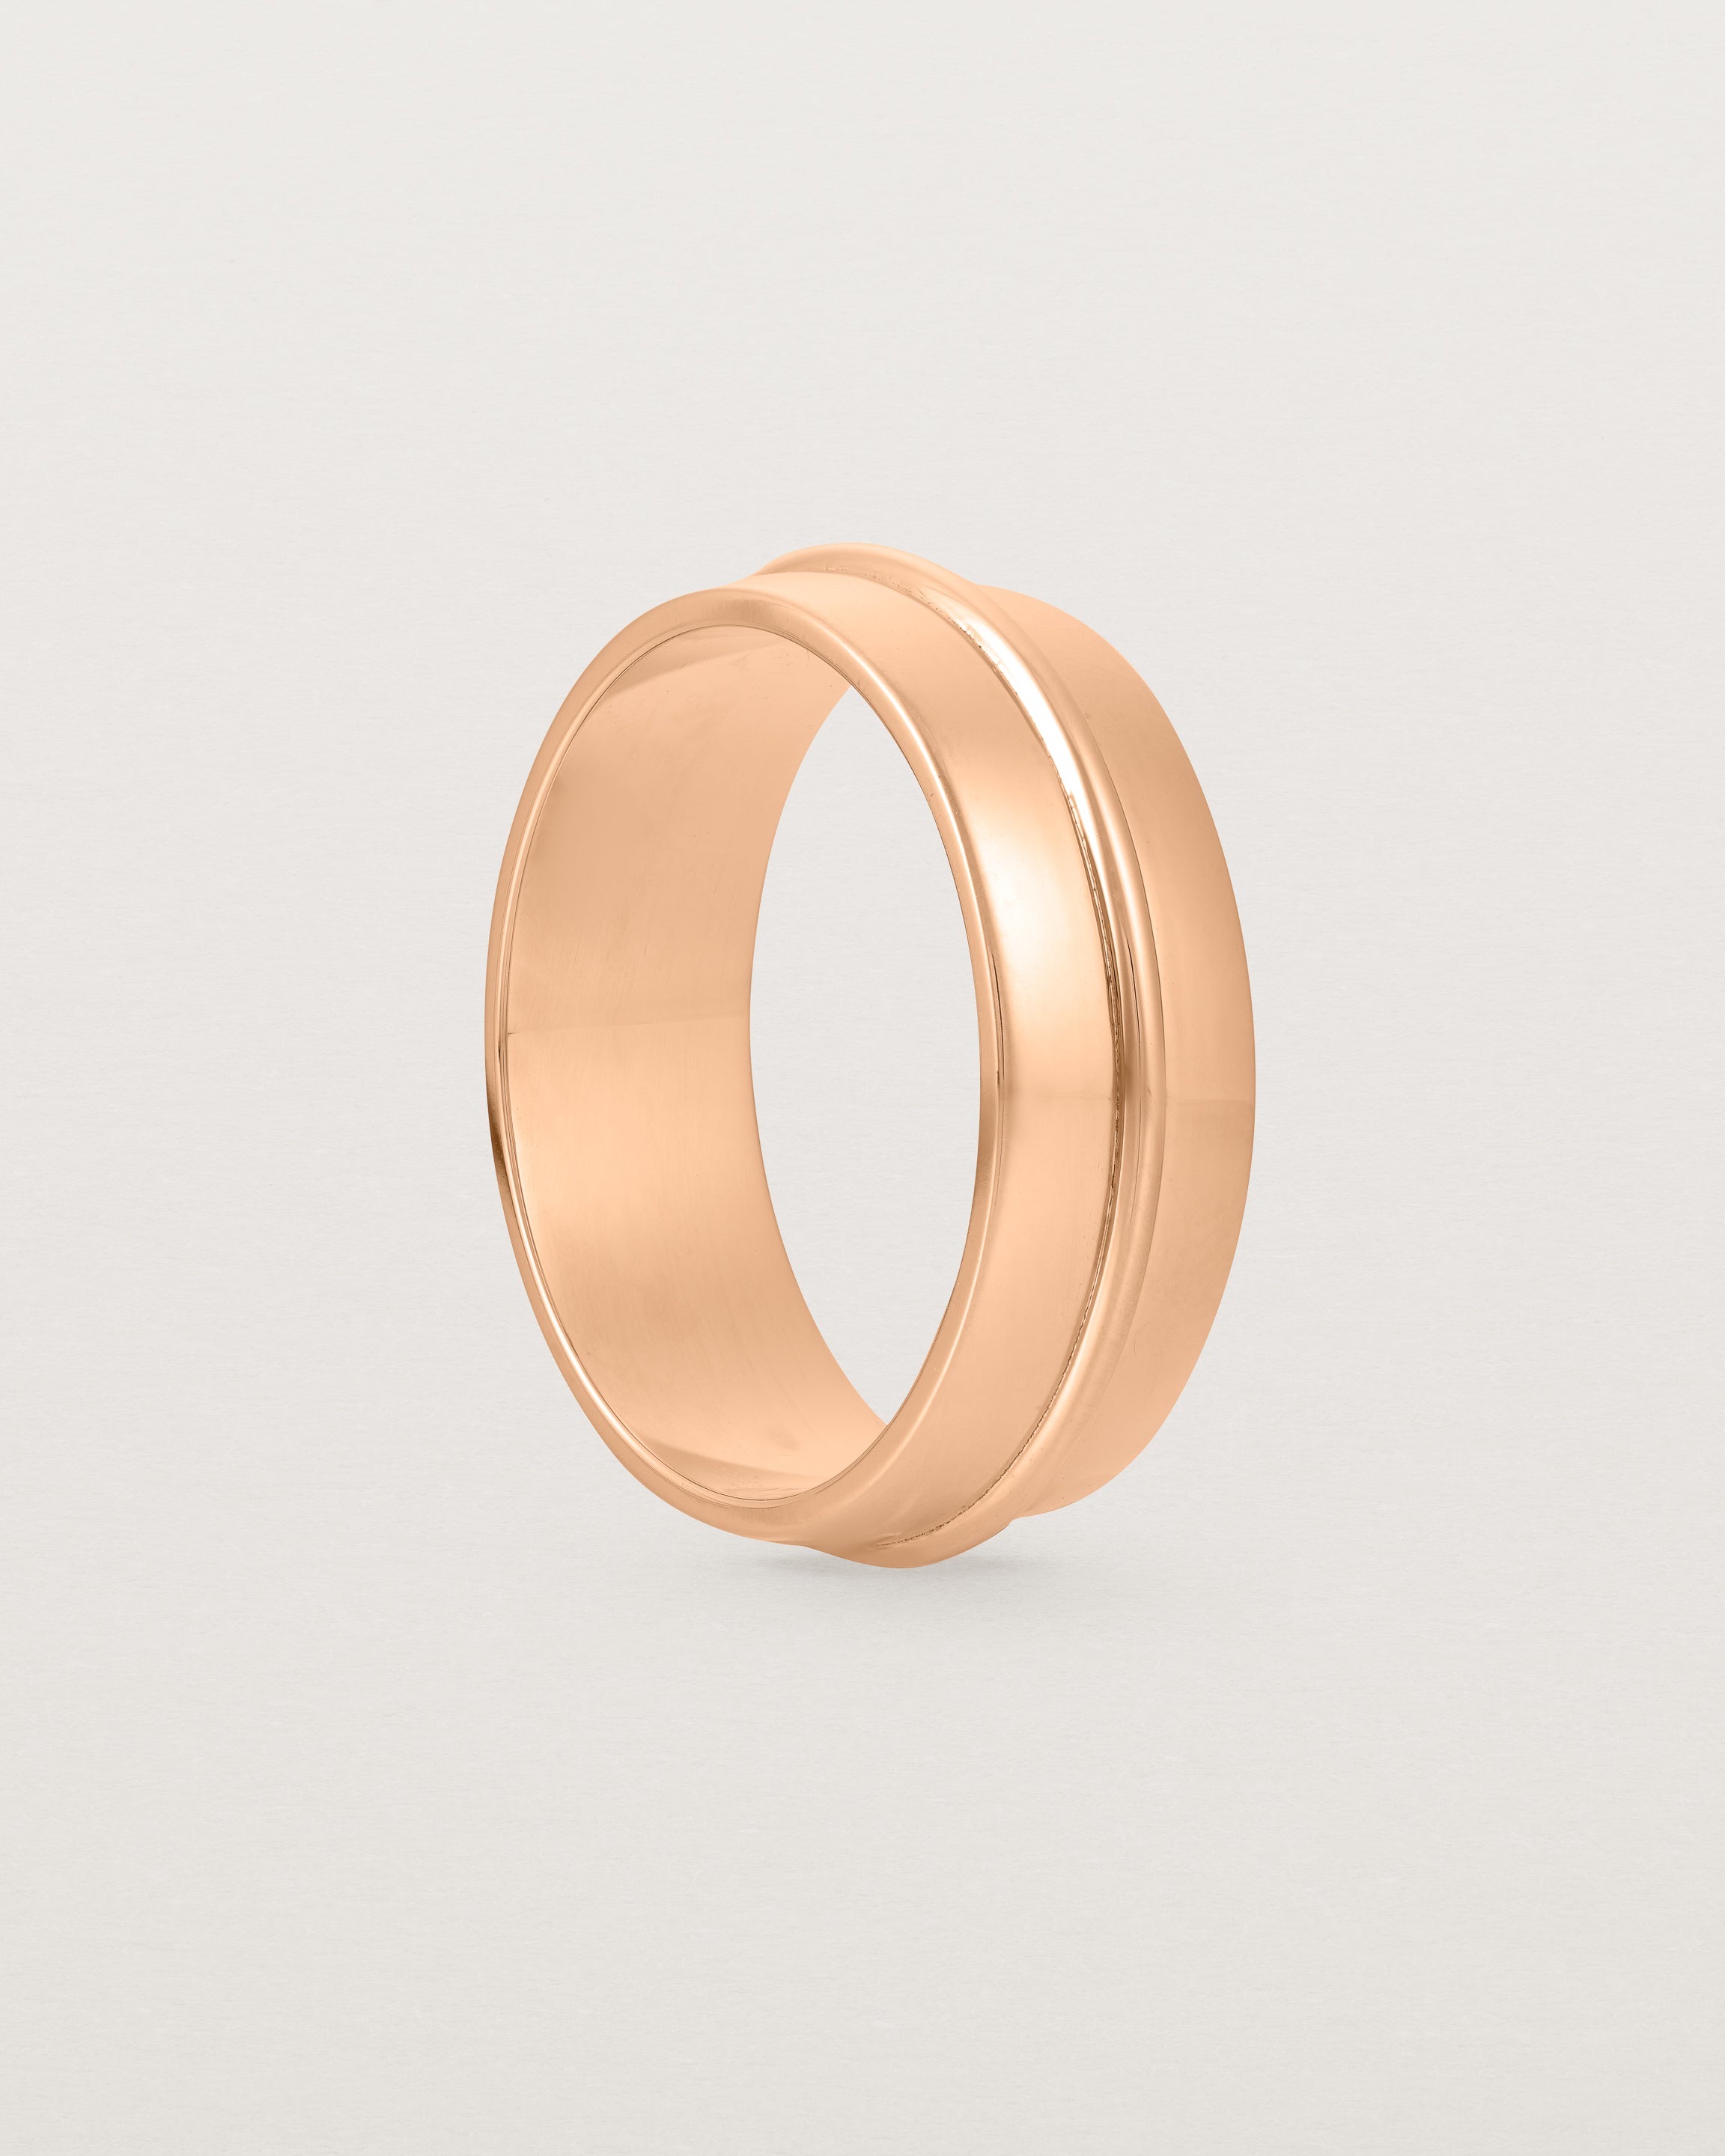 Standing view of the Seam Wedding Ring | 7mm | Rose Gold.